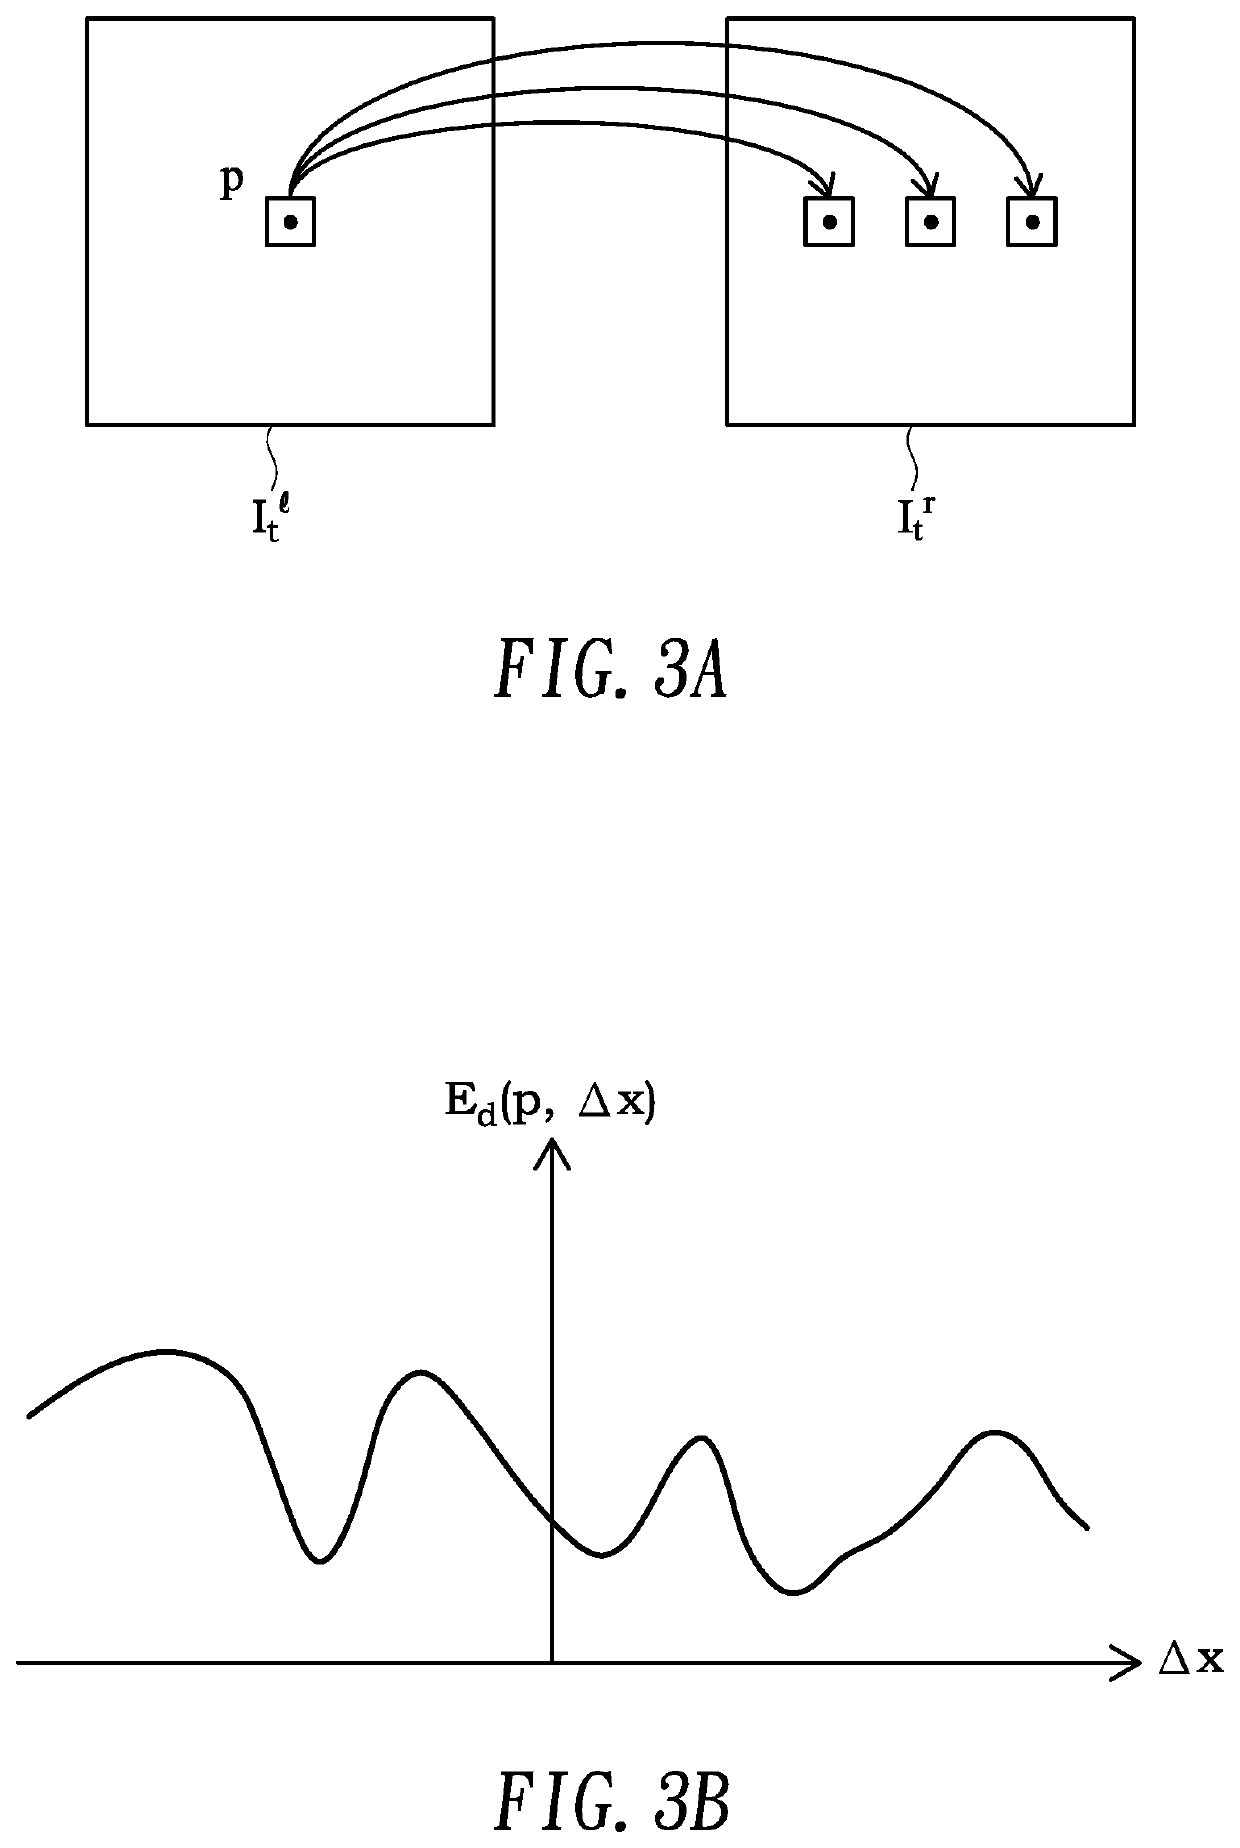 Temporally consistent belief propagation system and method